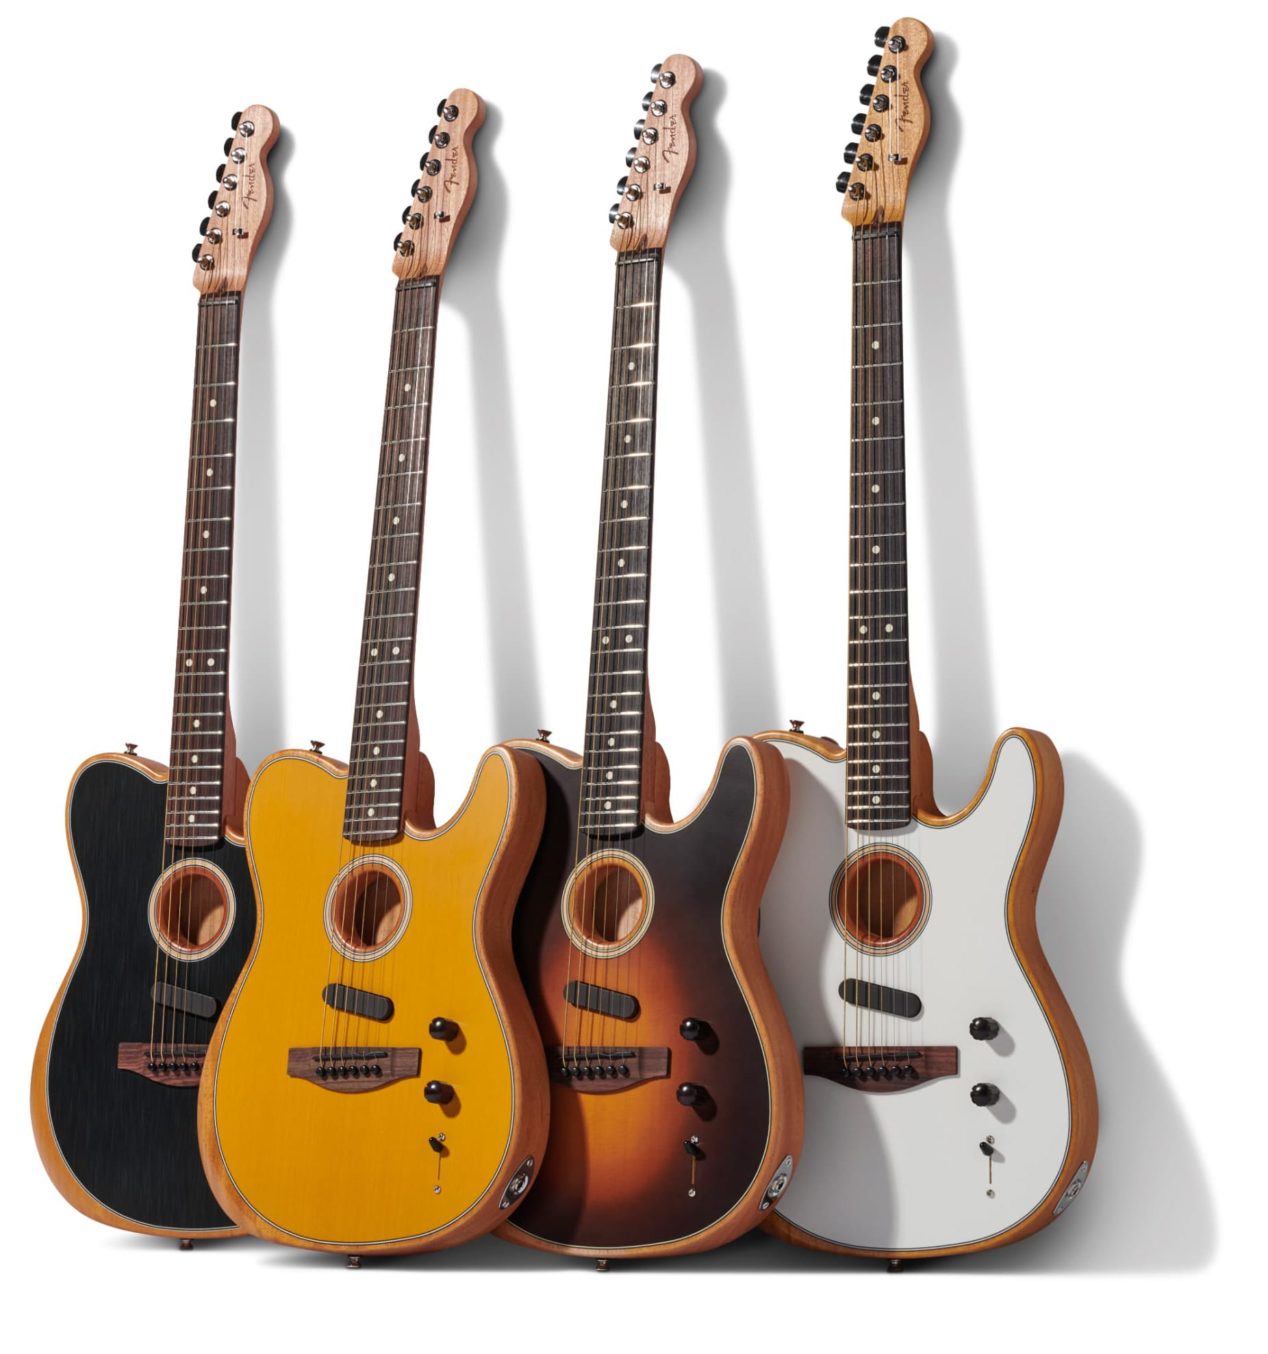 Photo of a multiple Acoustasonic guitars against a white background.